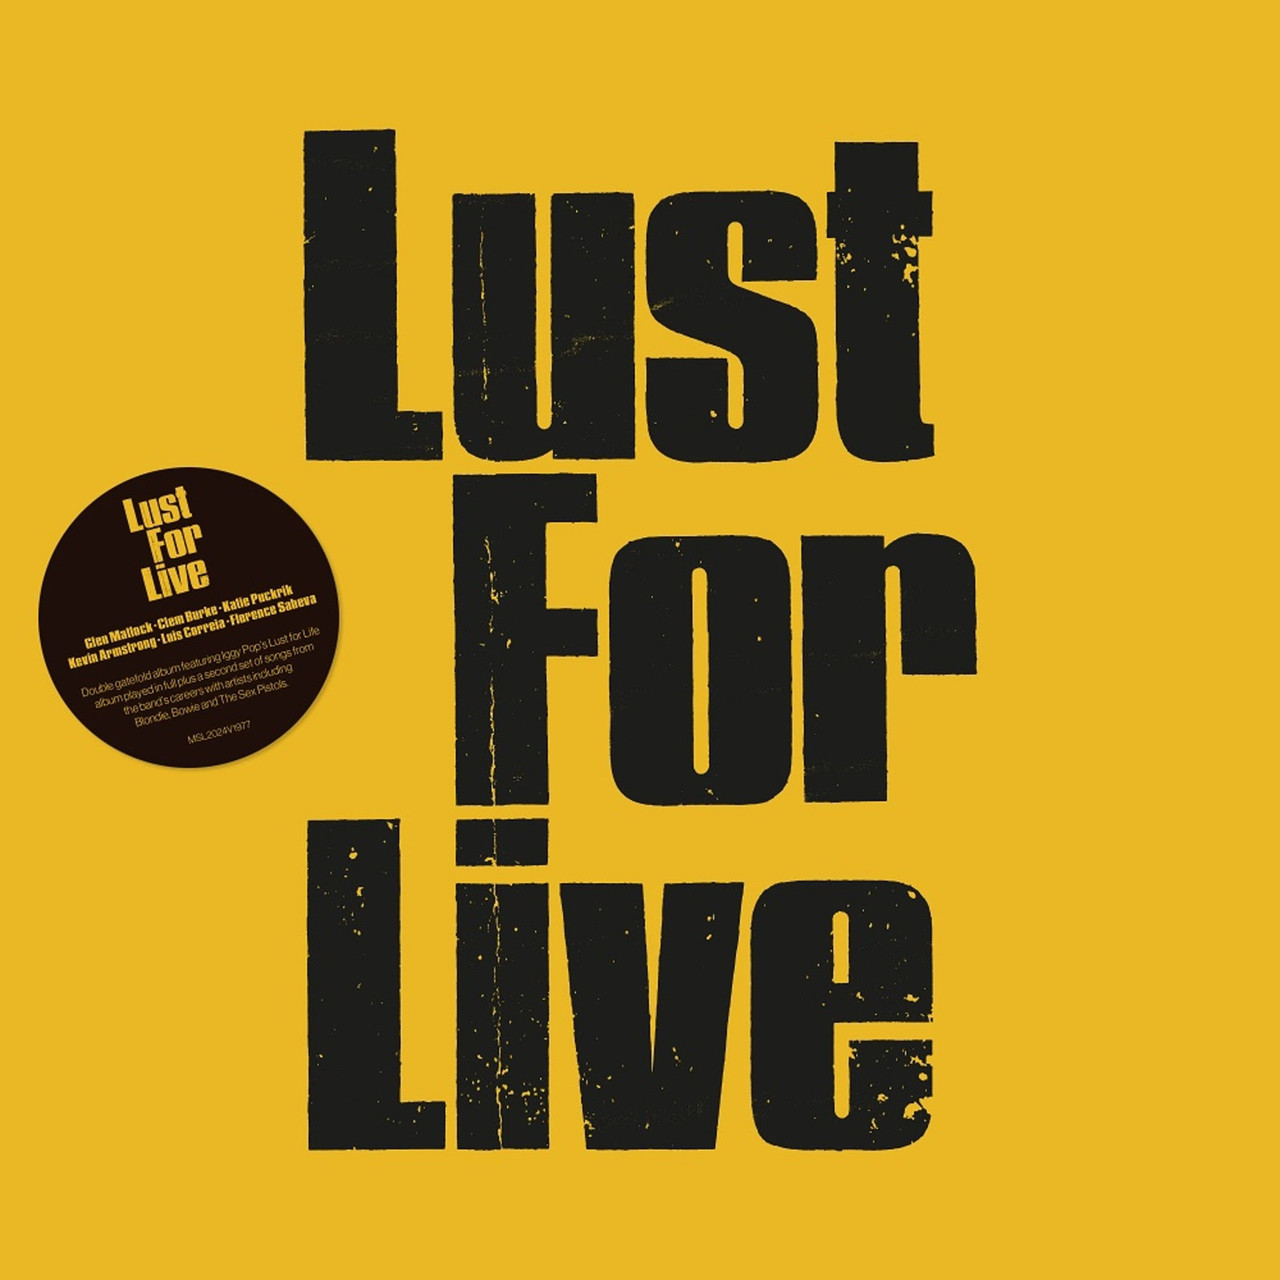 Lust for Life Band